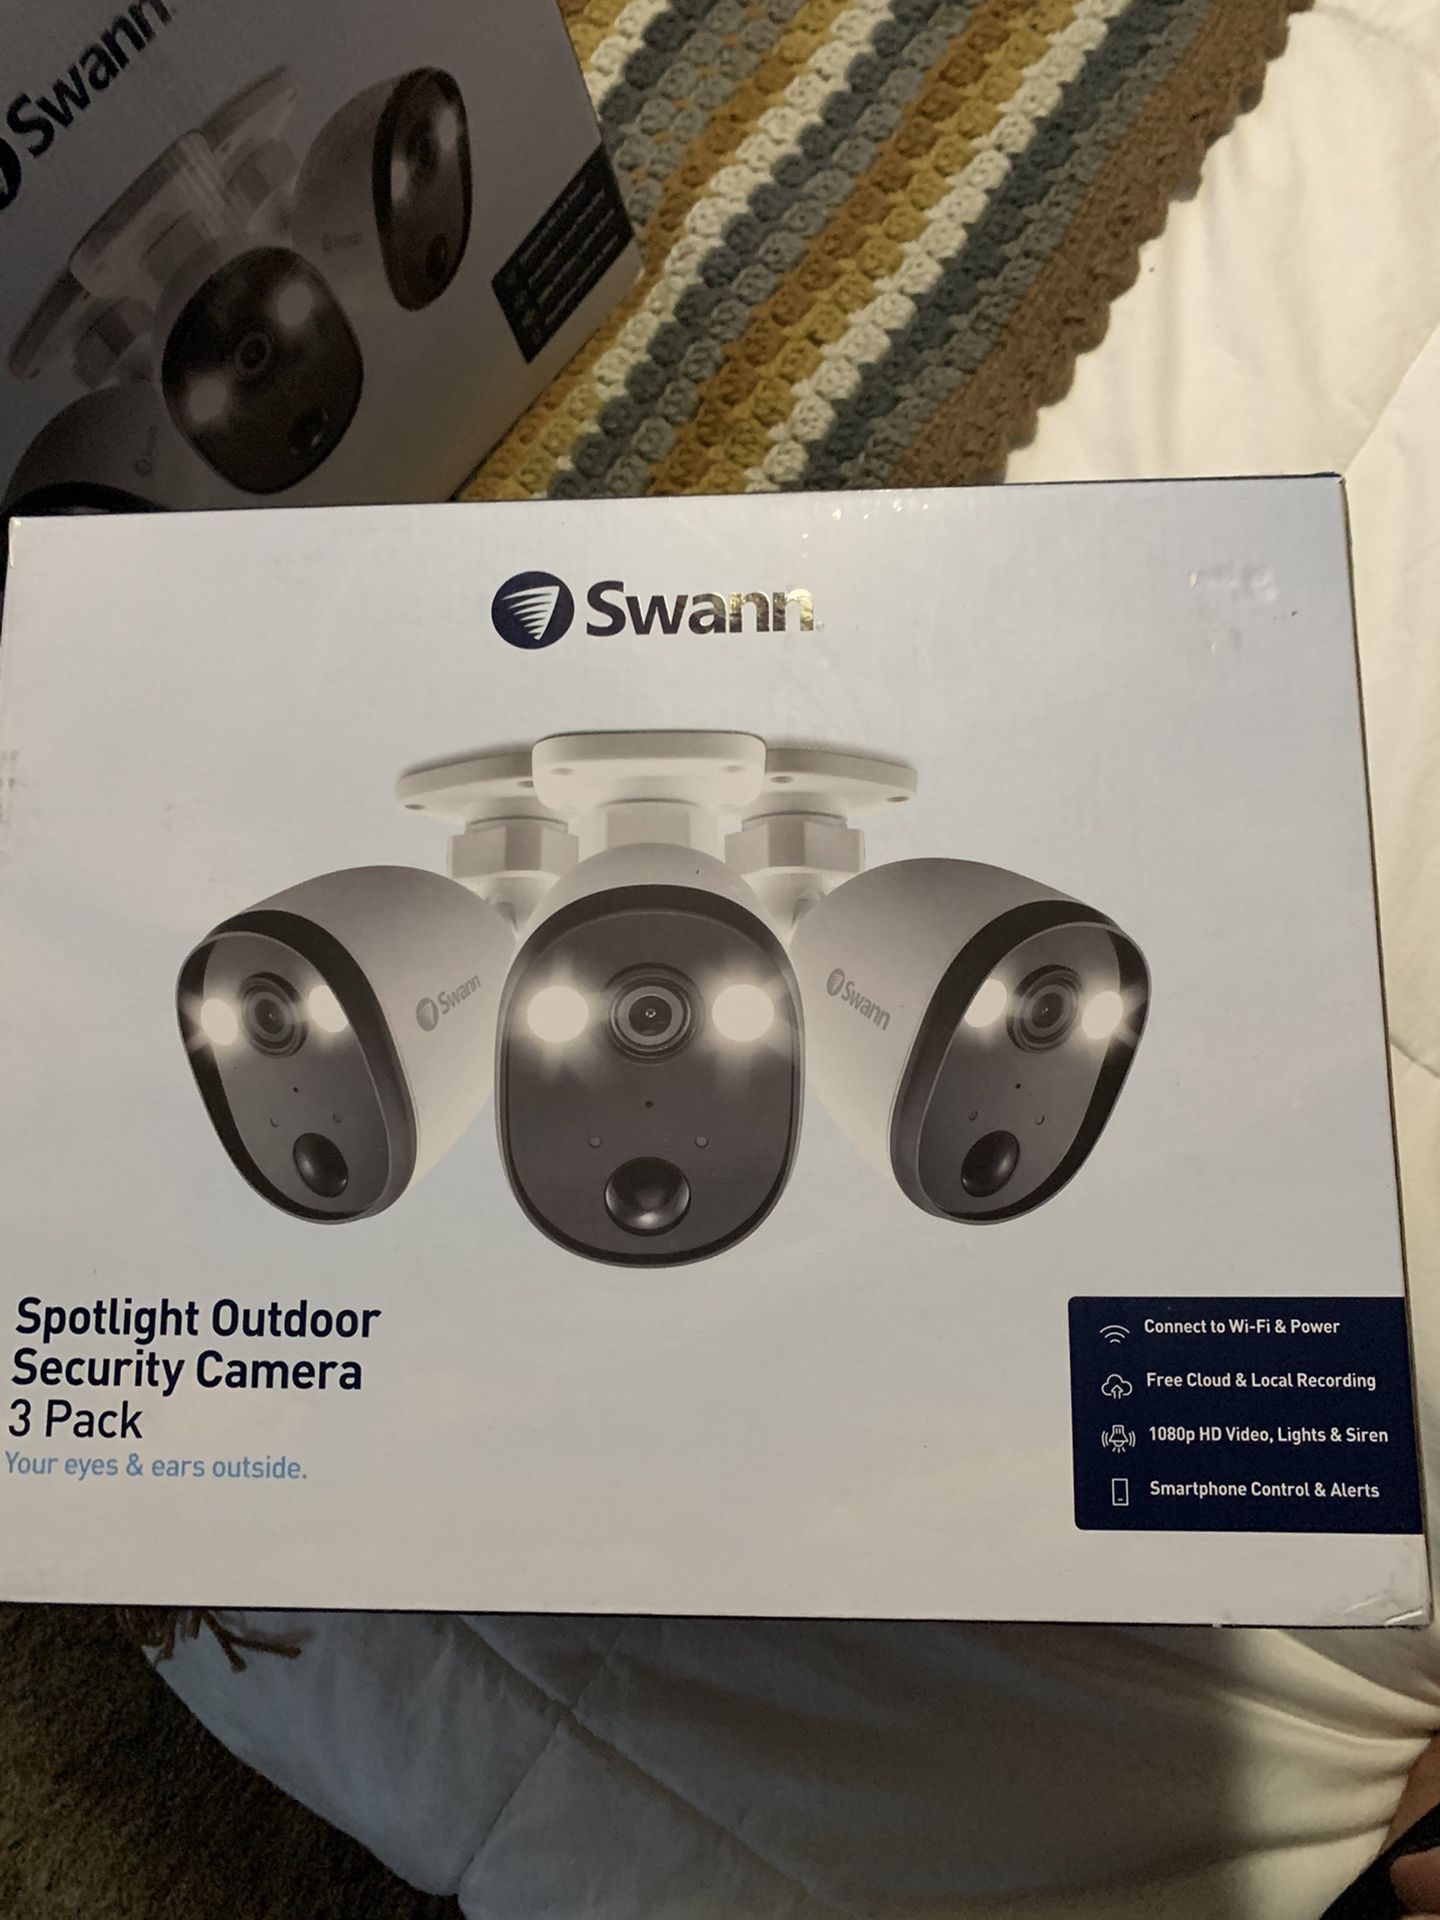 Swann 1080p HD Spotlight Outdoor Security Cameras 3 pack New In the box. NO DVR needed Voice Communication Free ICloud Siren View on Smartphone $150